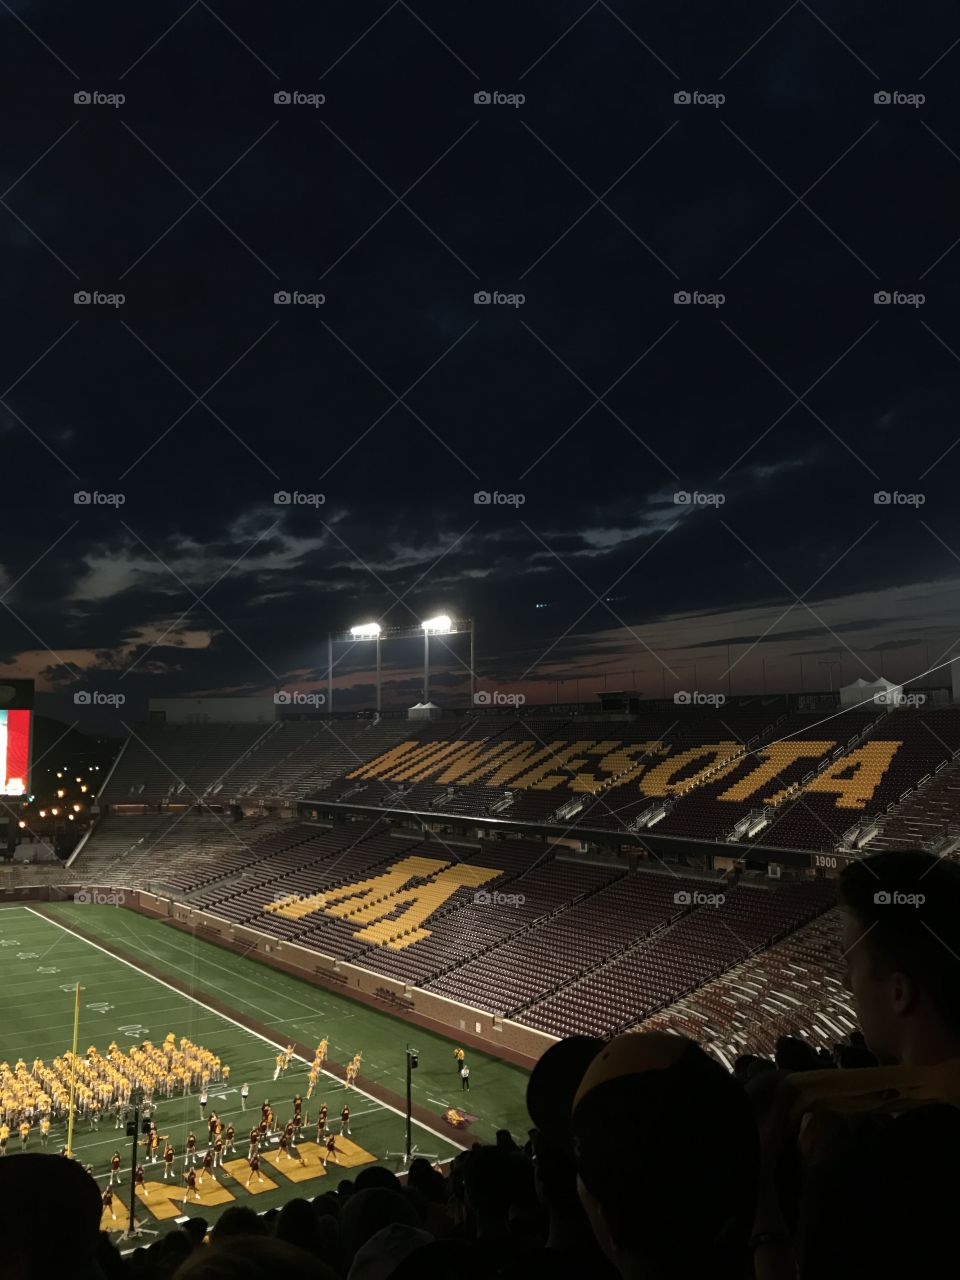 University of Minnesota football stadium at dusk, with marching band on field below